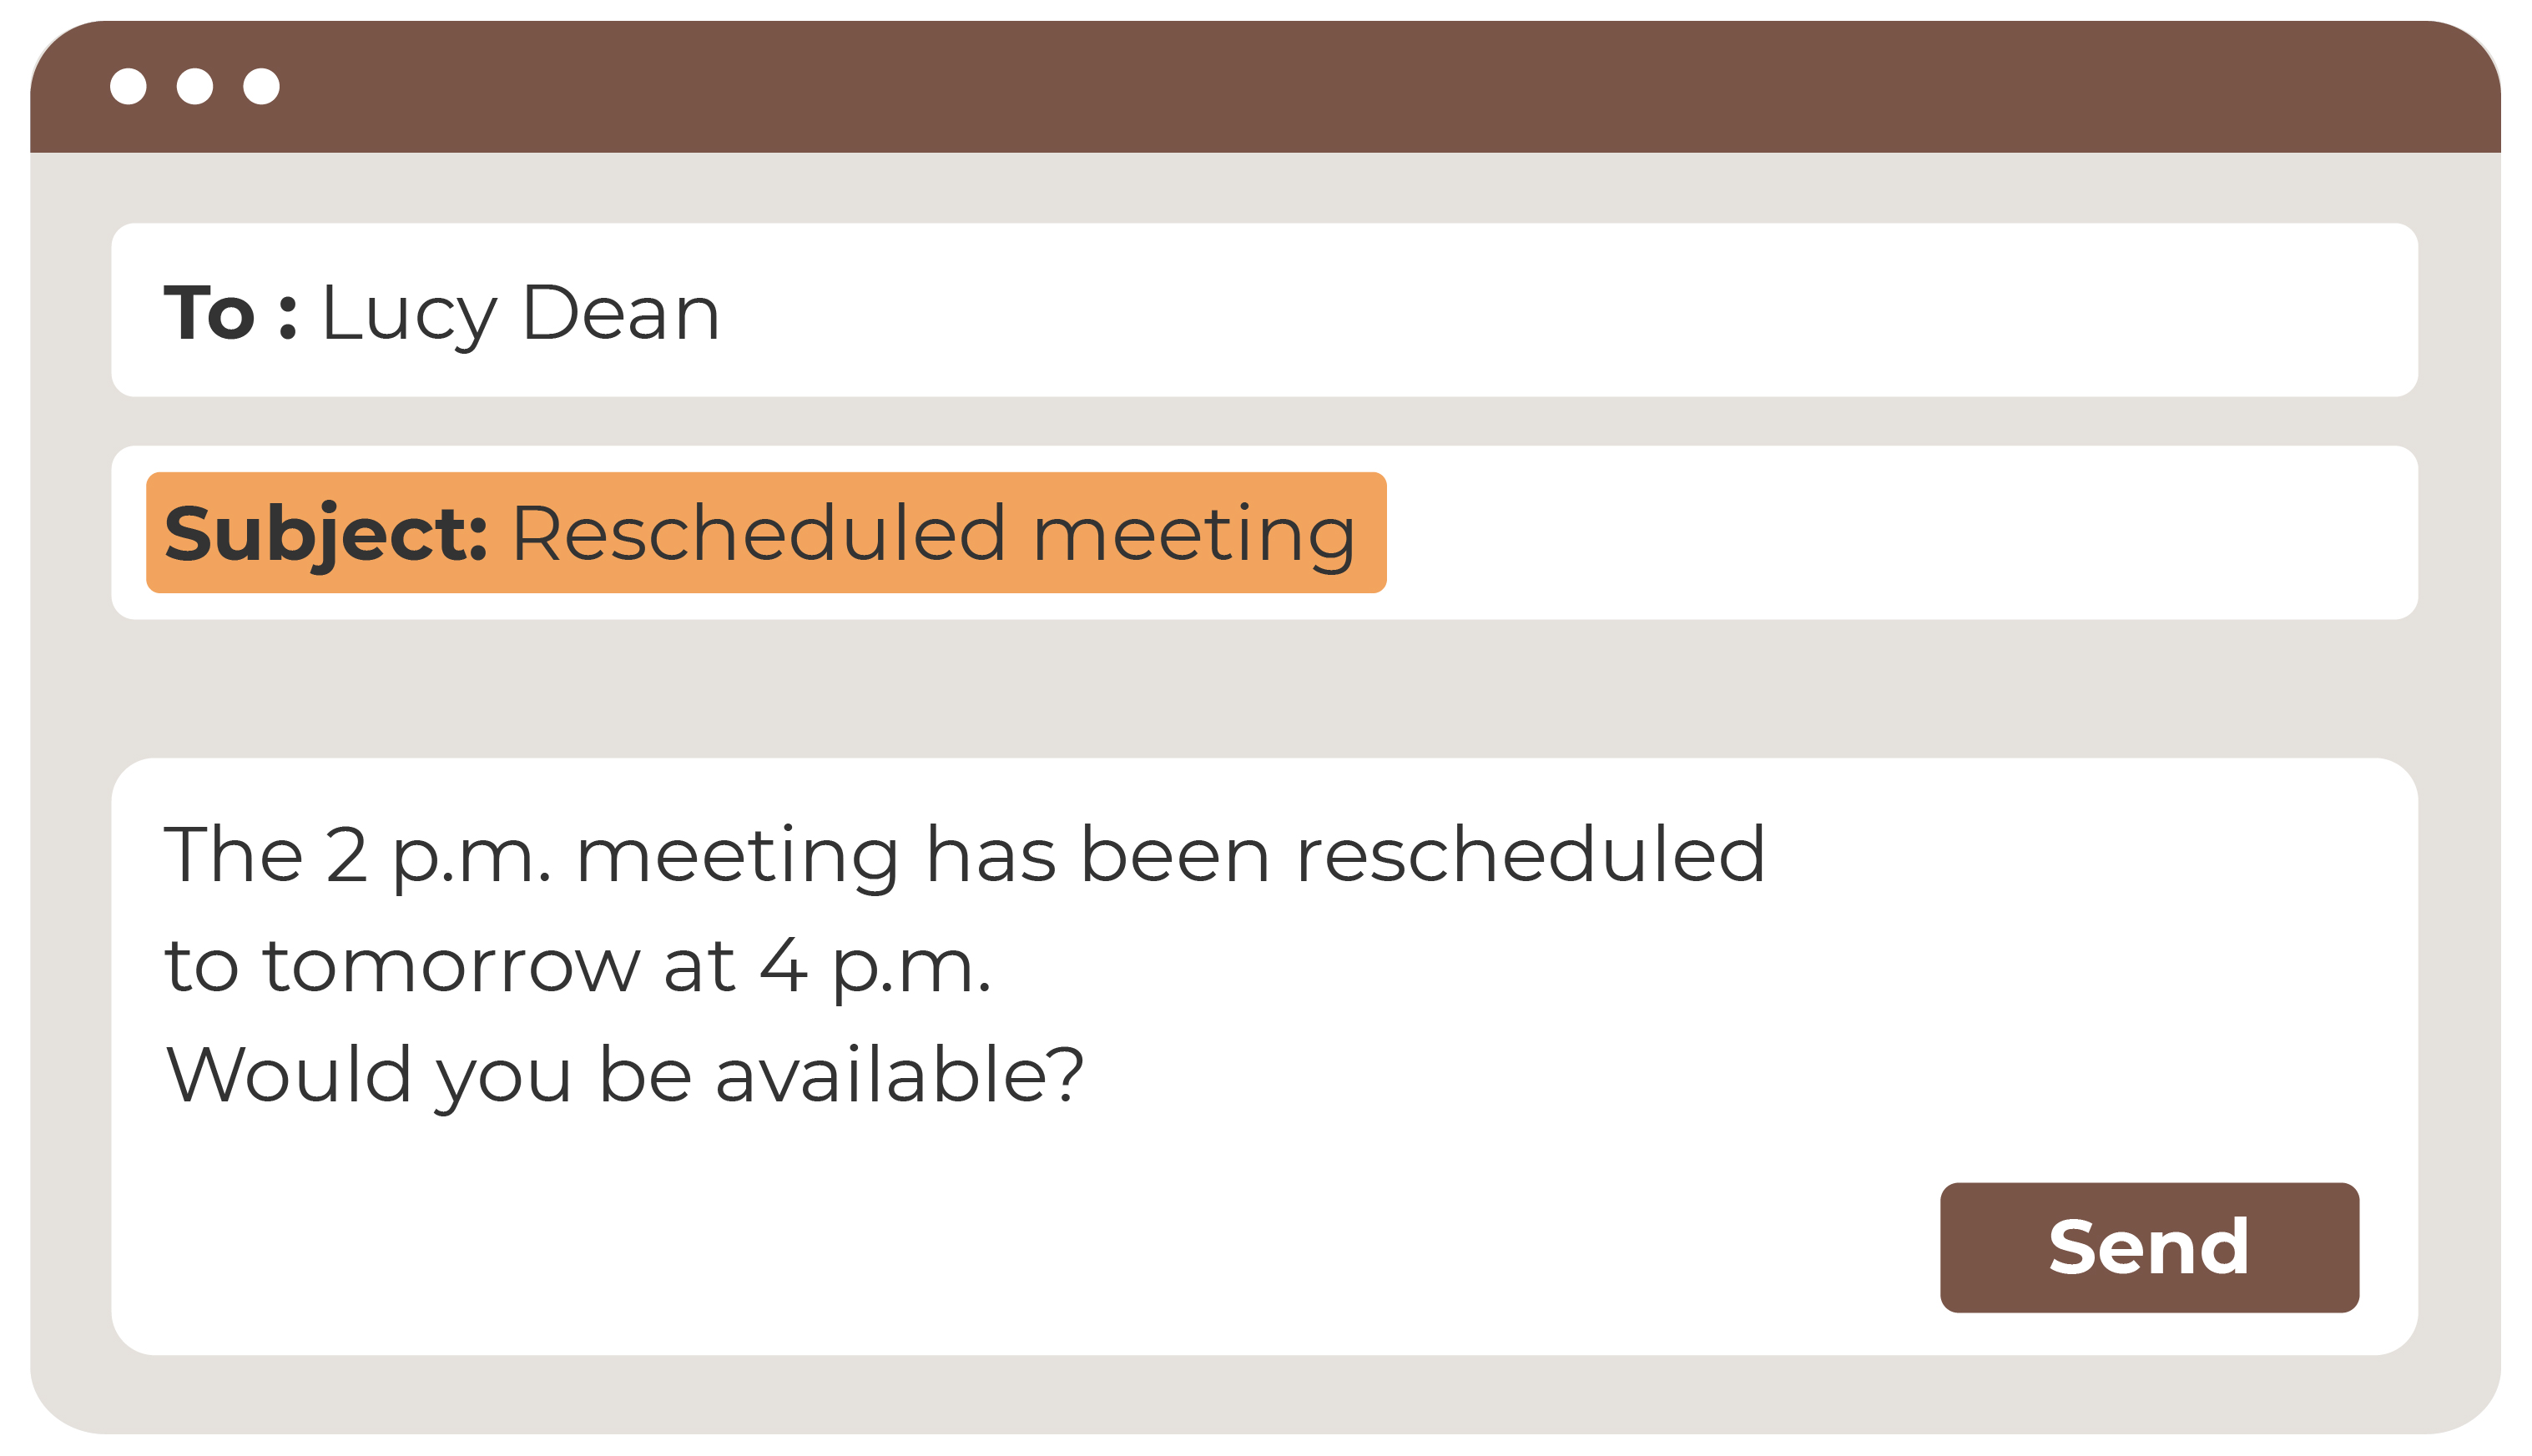 email that reads: To: Lucy Dean Subject: Rescheduled meeting (text highlighted) The 2 p.m. meeting has been rescheduled to tomorrow at 4 p.m. Would you be available?